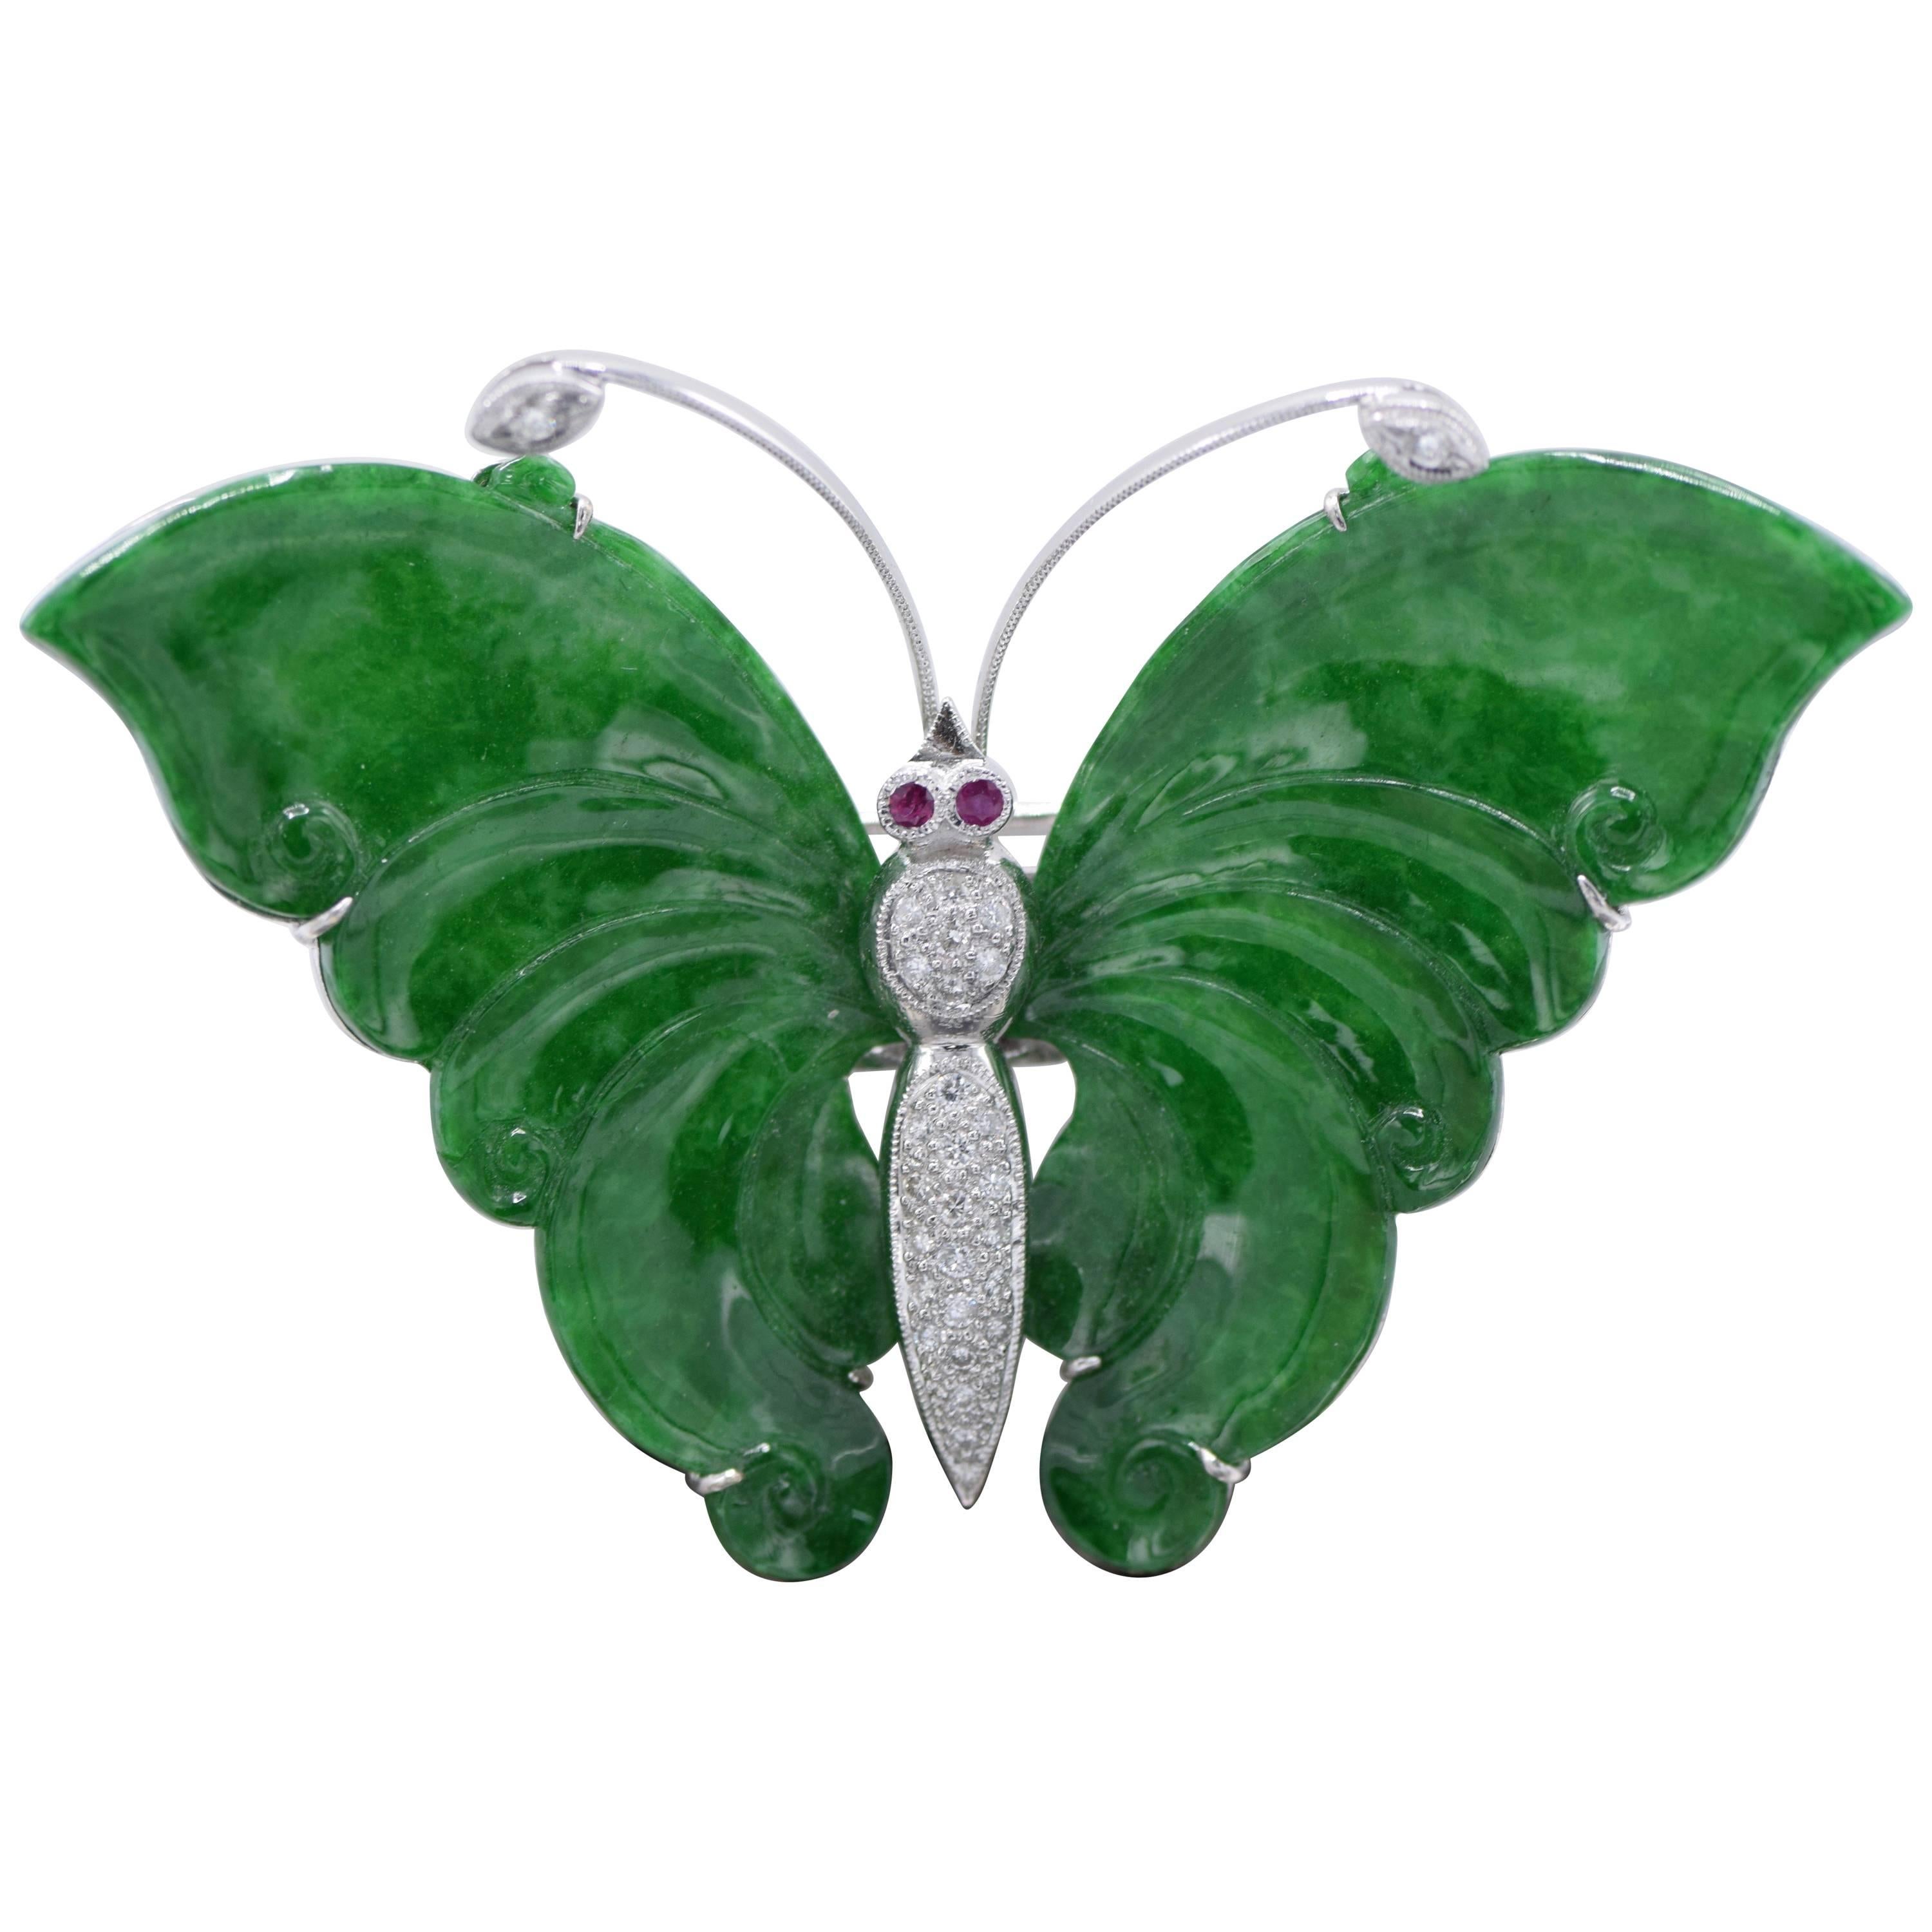 Certified Jade, Ruby, and Diamond Butterfly Pendant and Brooch